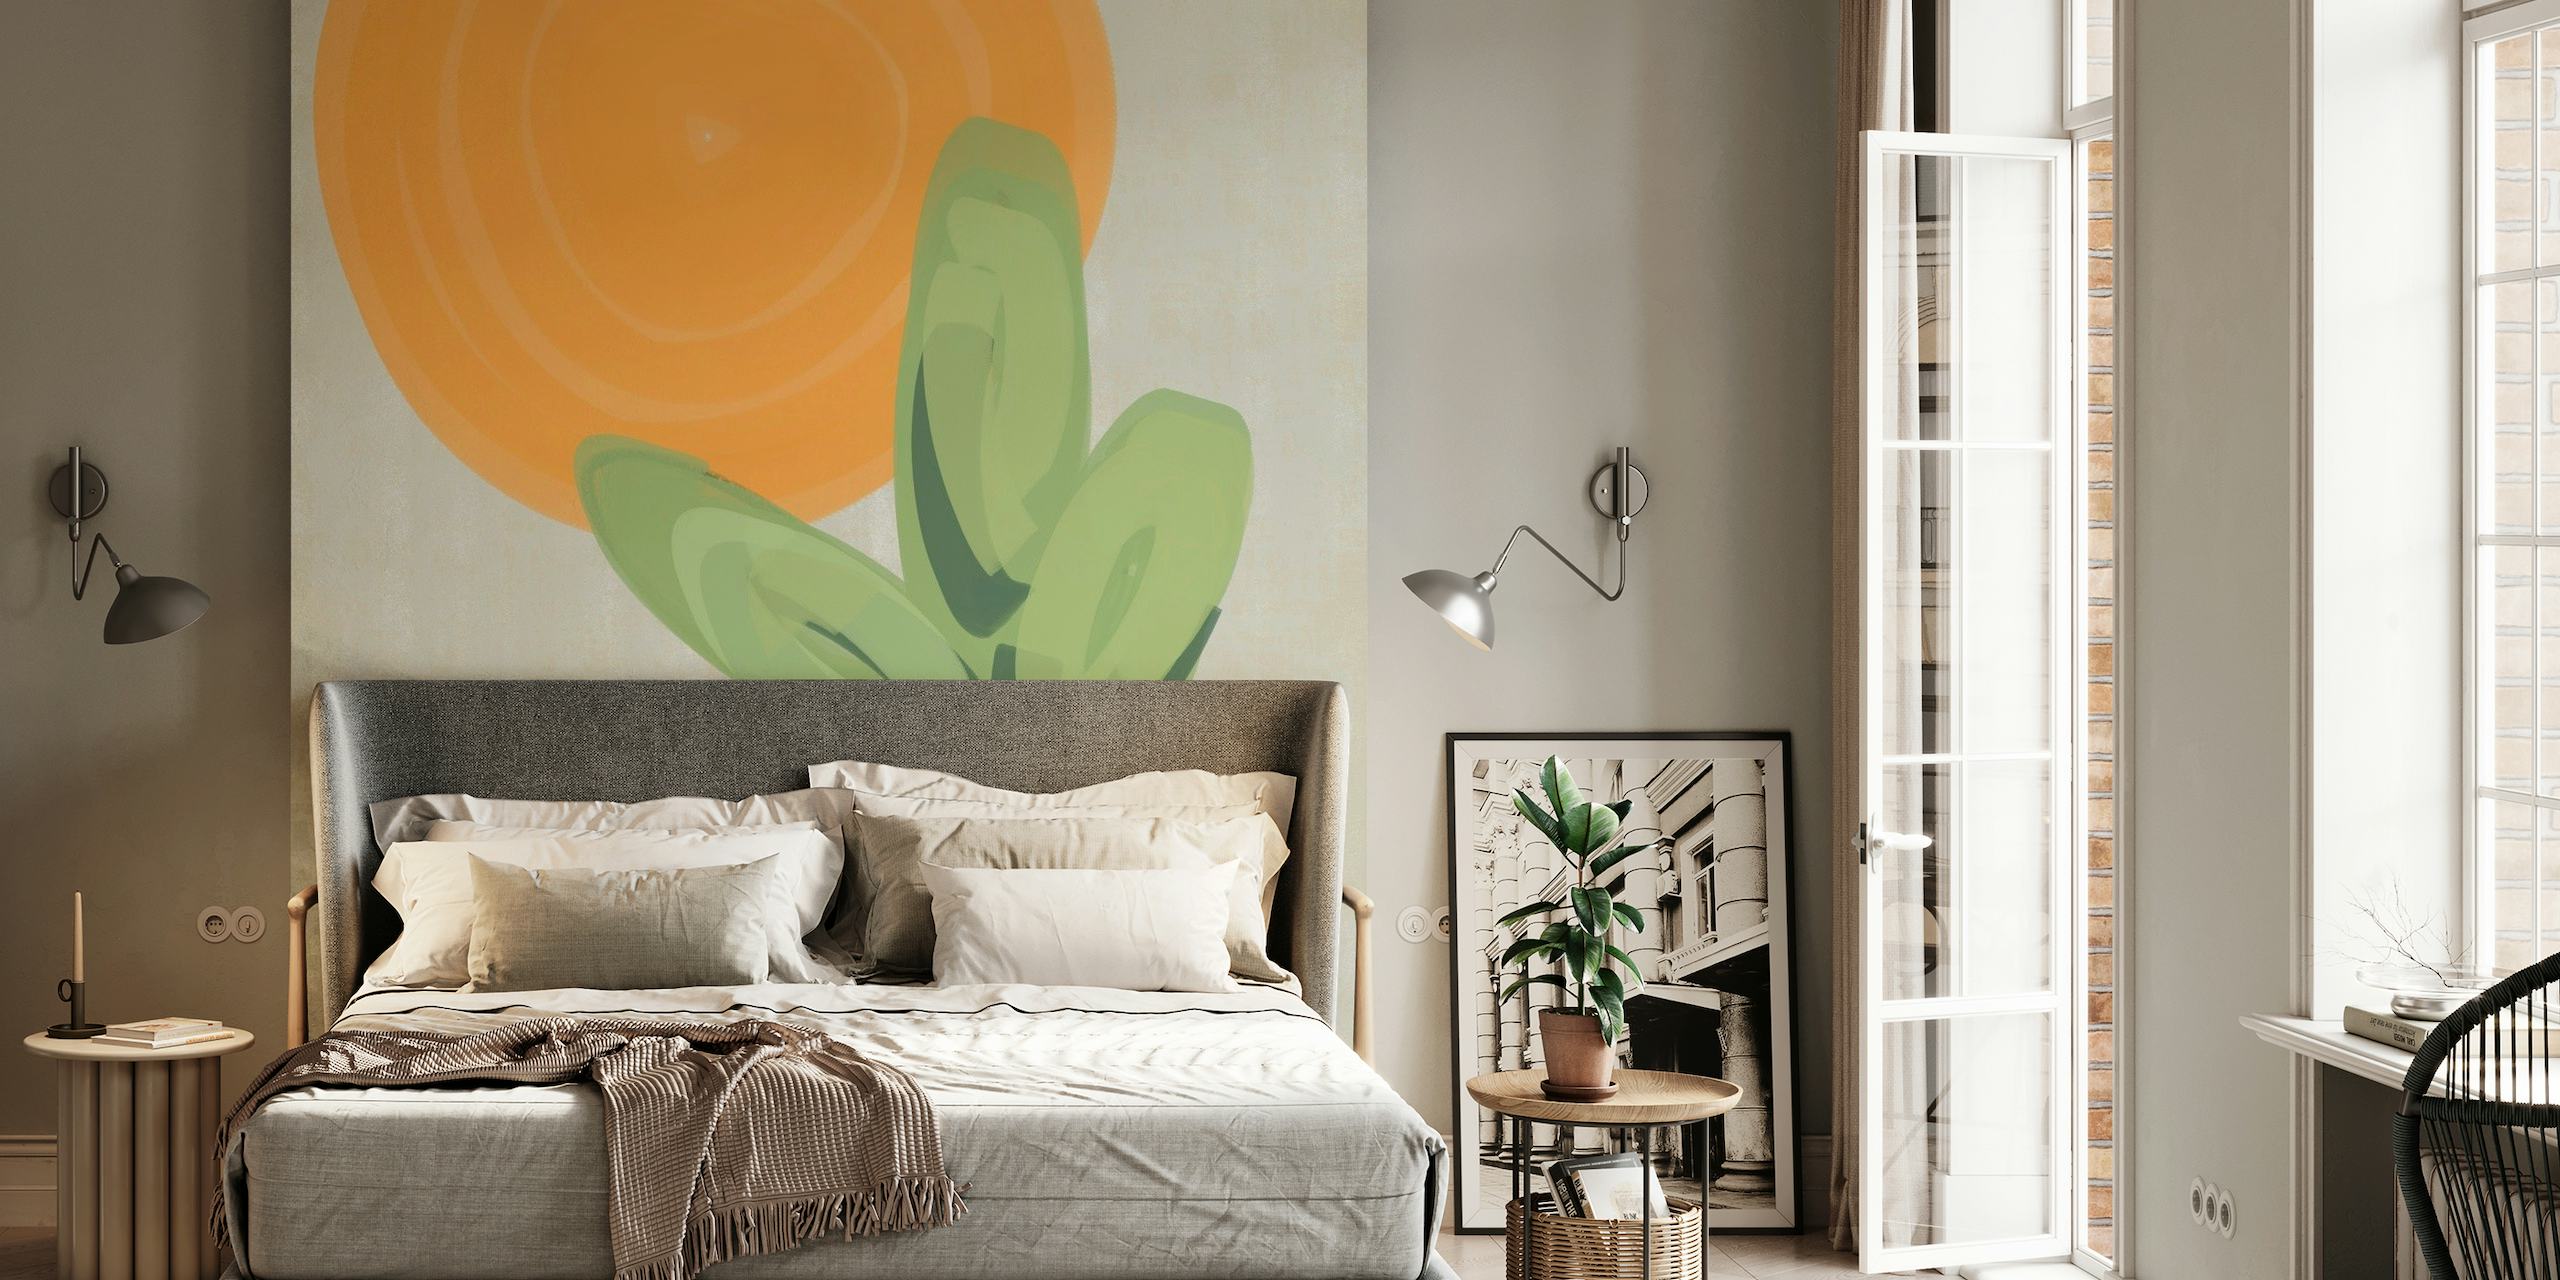 Abstract sun and potted plant wall mural design